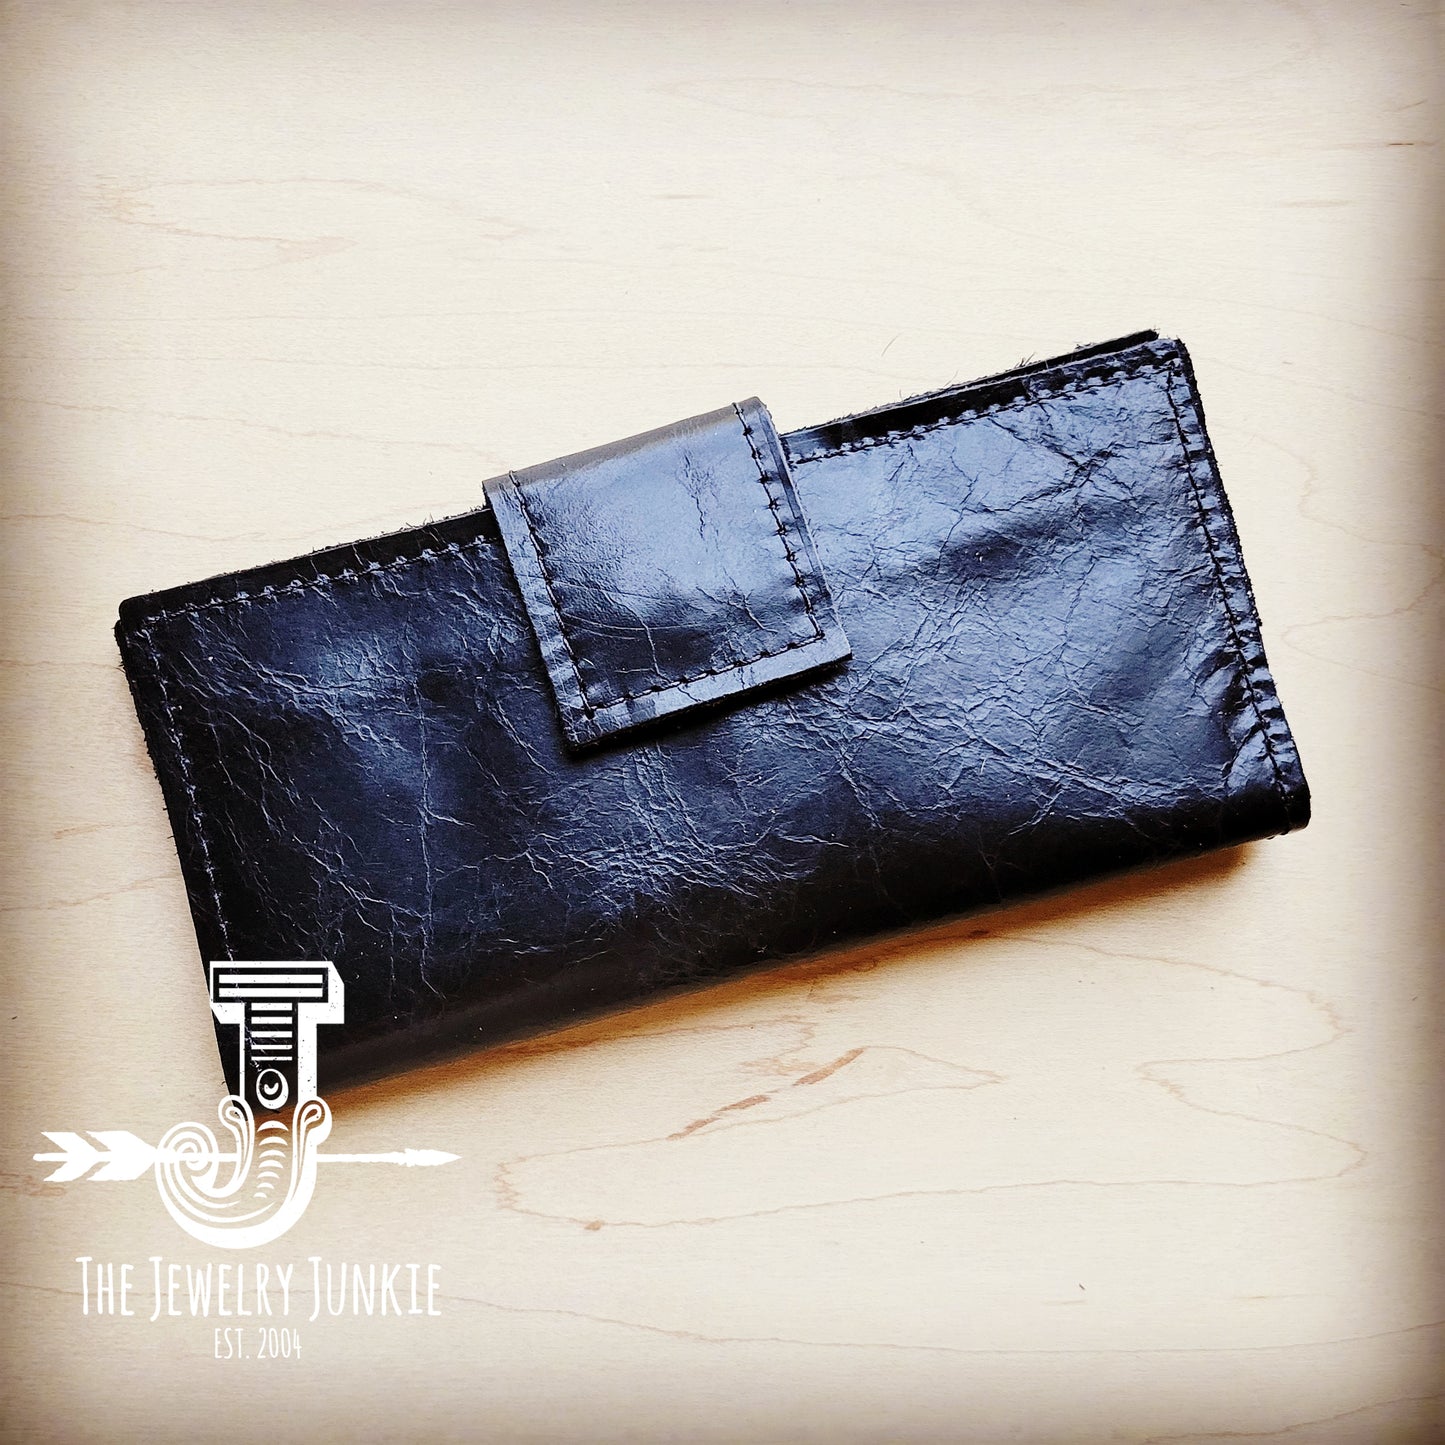 Distressed Leather Wallet-Black with Snap 304e